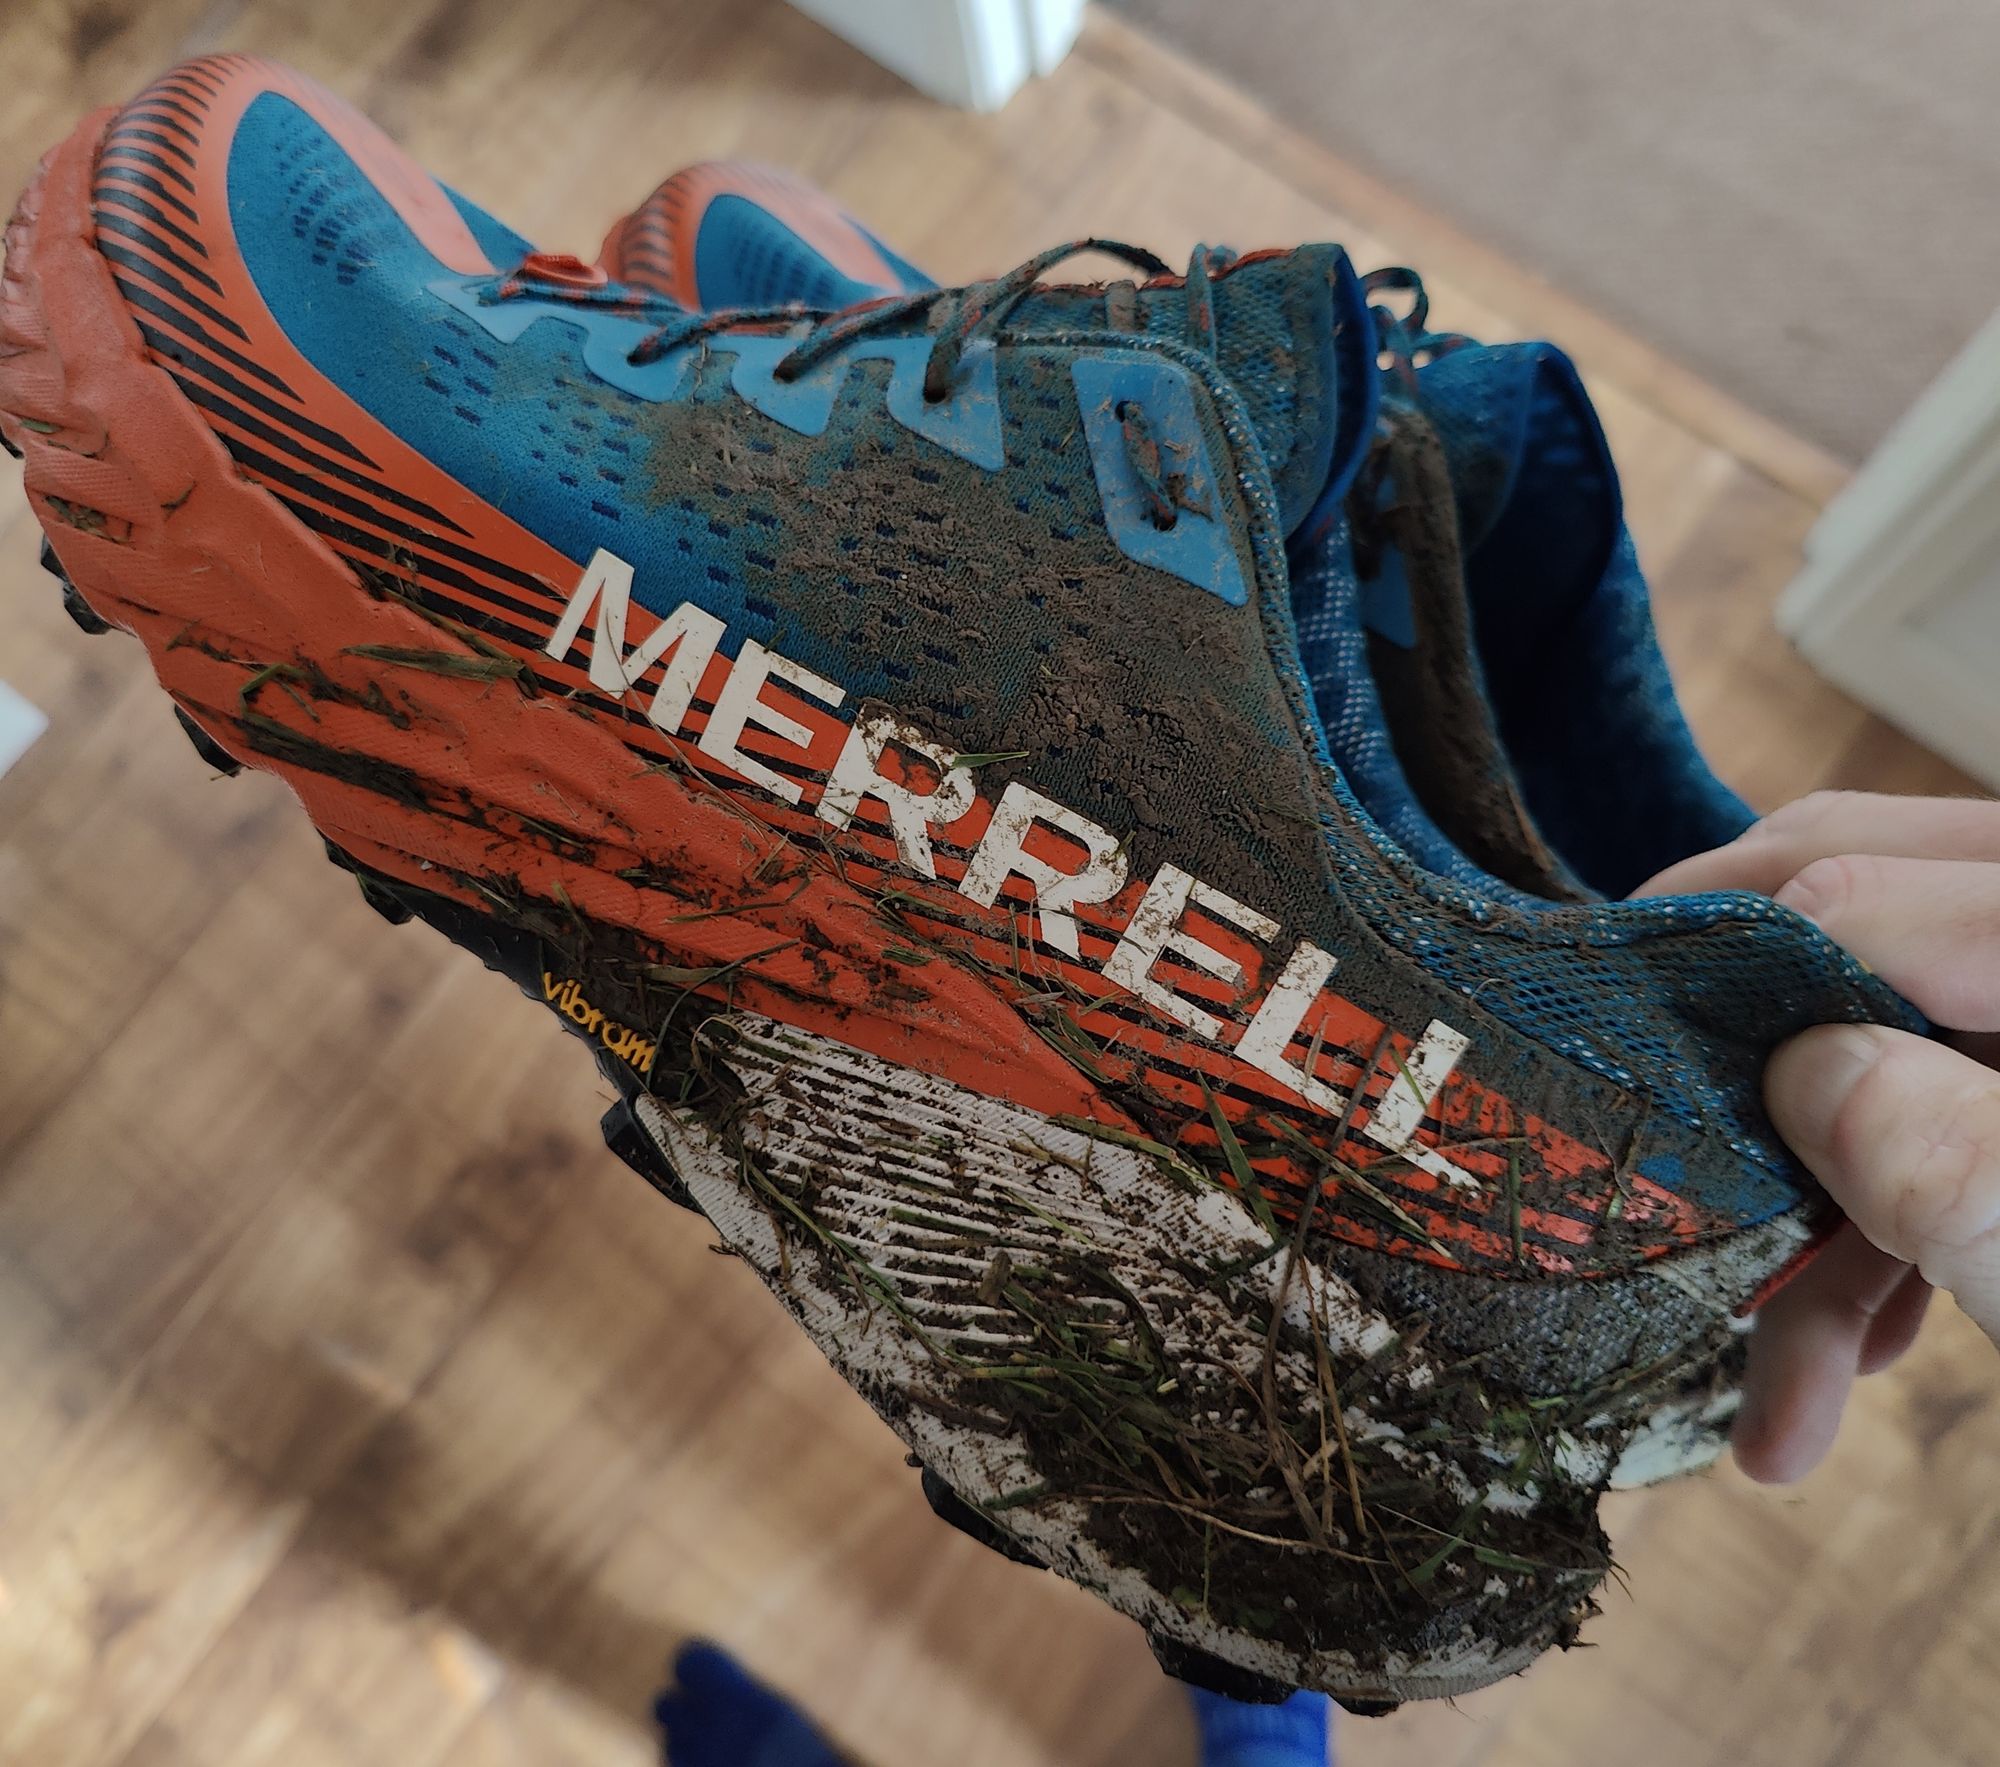 Review: Merrell Trail Glove Shoes - My FiveFingers